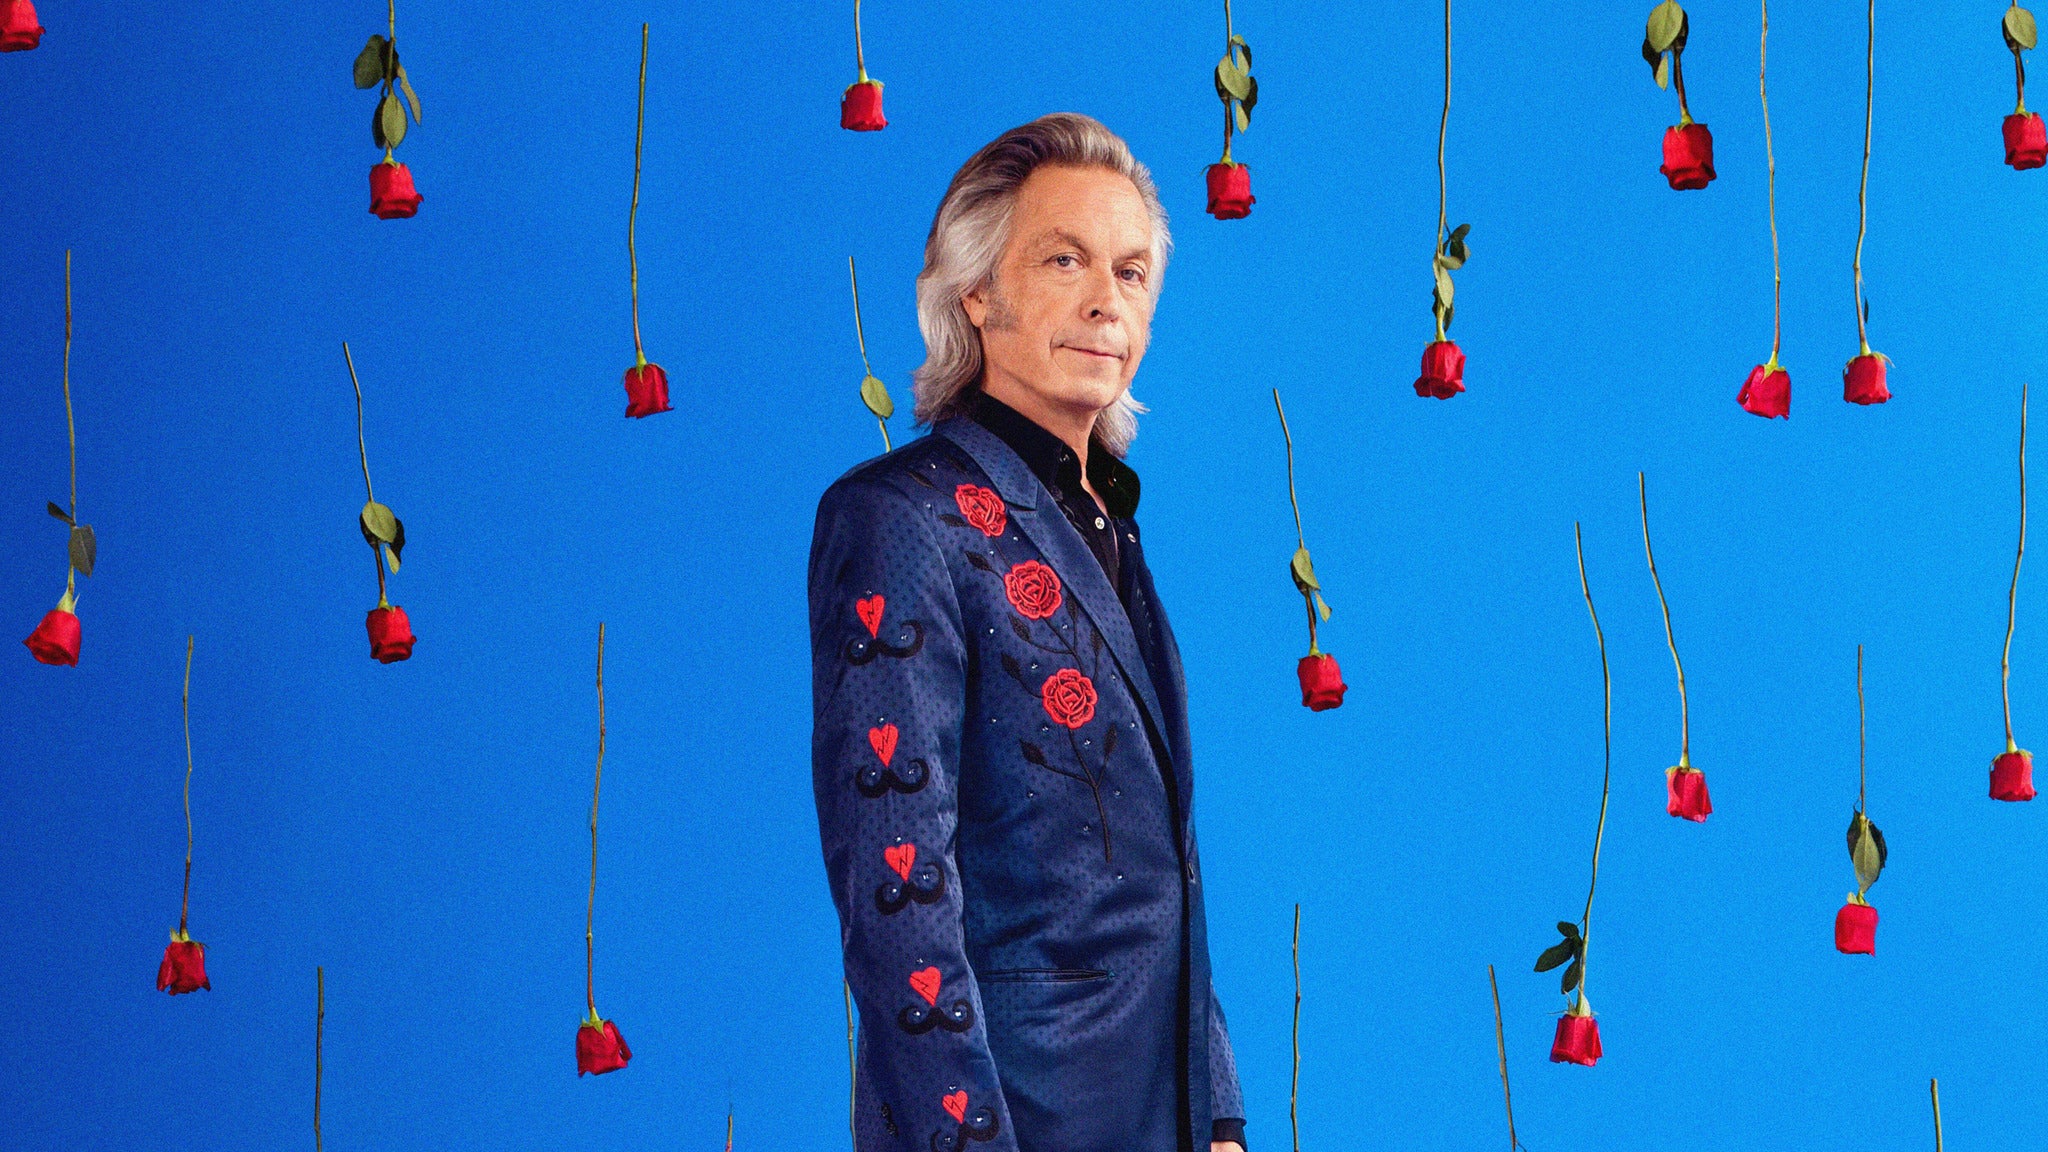 Image used with permission from Ticketmaster | Jim Lauderdale tickets